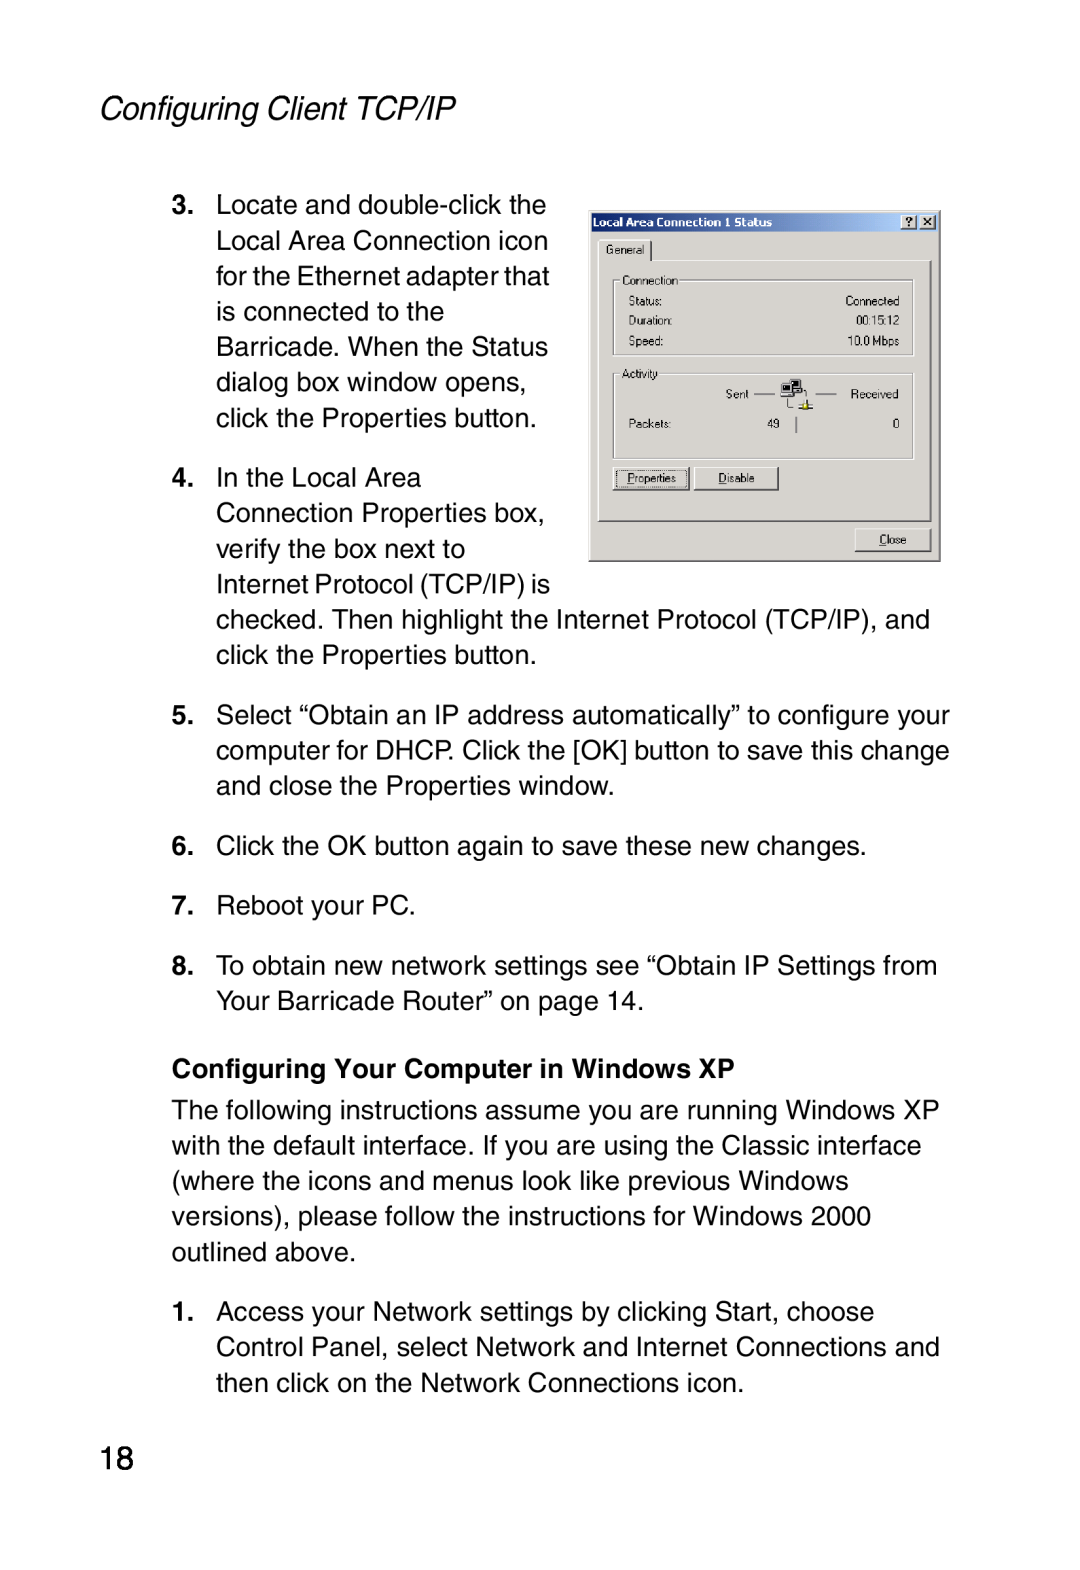 Sharp SMC7004ABR, S M C 7 0 0 4 A B R manual Configuring Your Computer in Windows XP, Configuring Client TCP/IP 